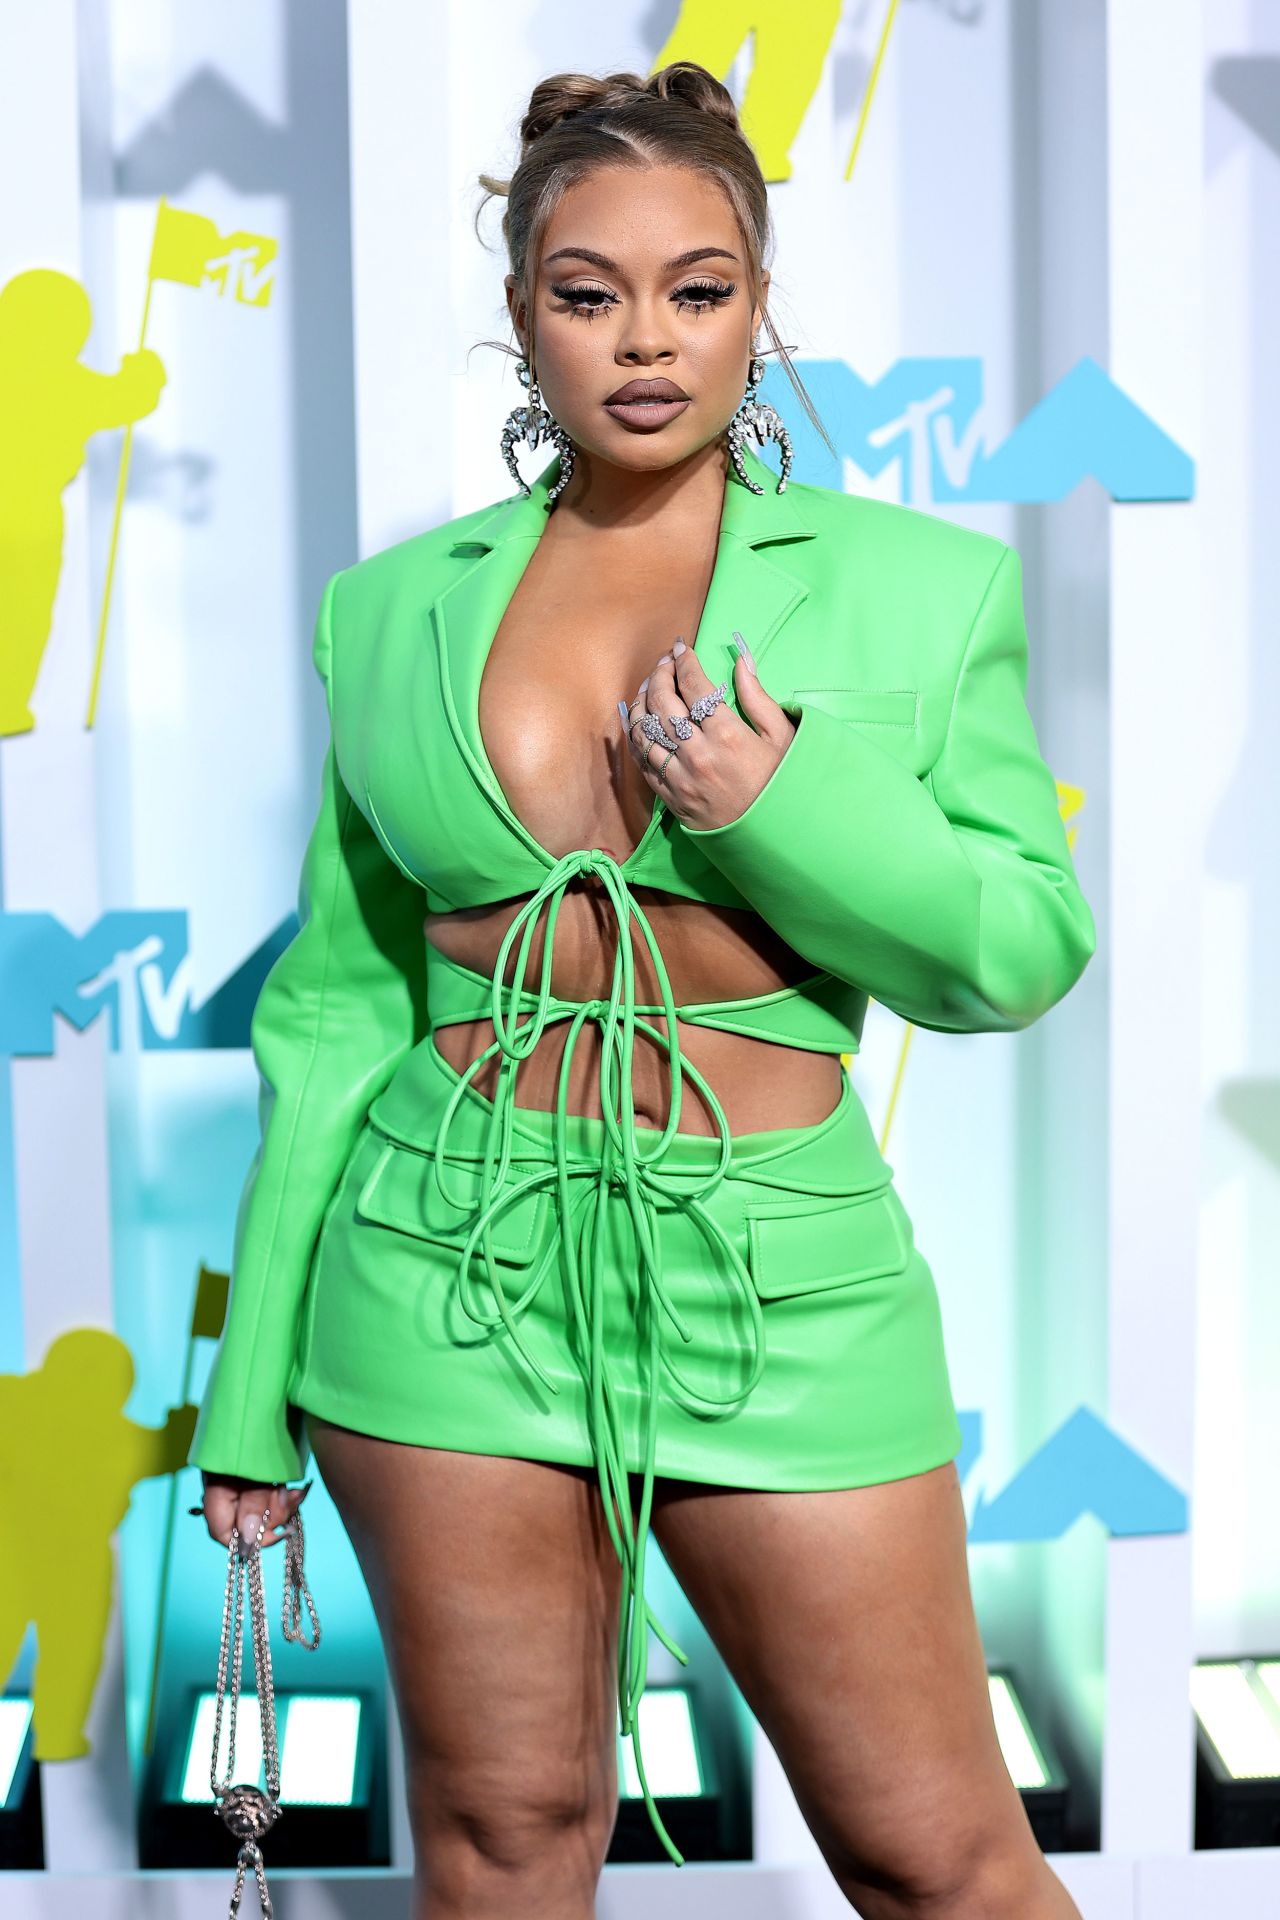 Bright greens popular on the VMAs carpet, with rapper Latto wearing a lace-up mini dress in a neon shade.